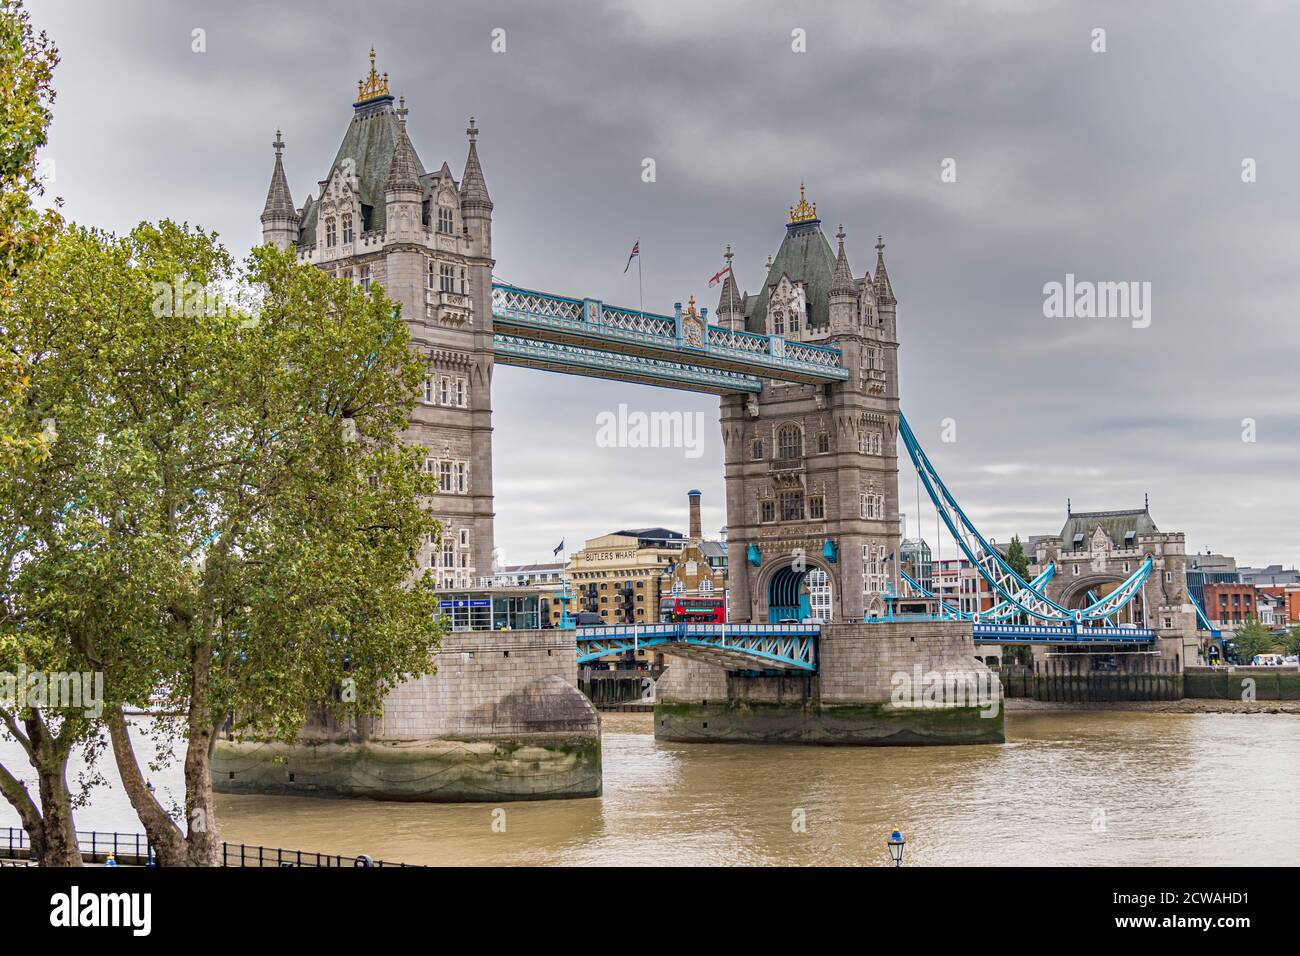 Tower Bridge, a world famous London landmark seen from inside the walls of The Tower Of London , London EC3 Stock Photo